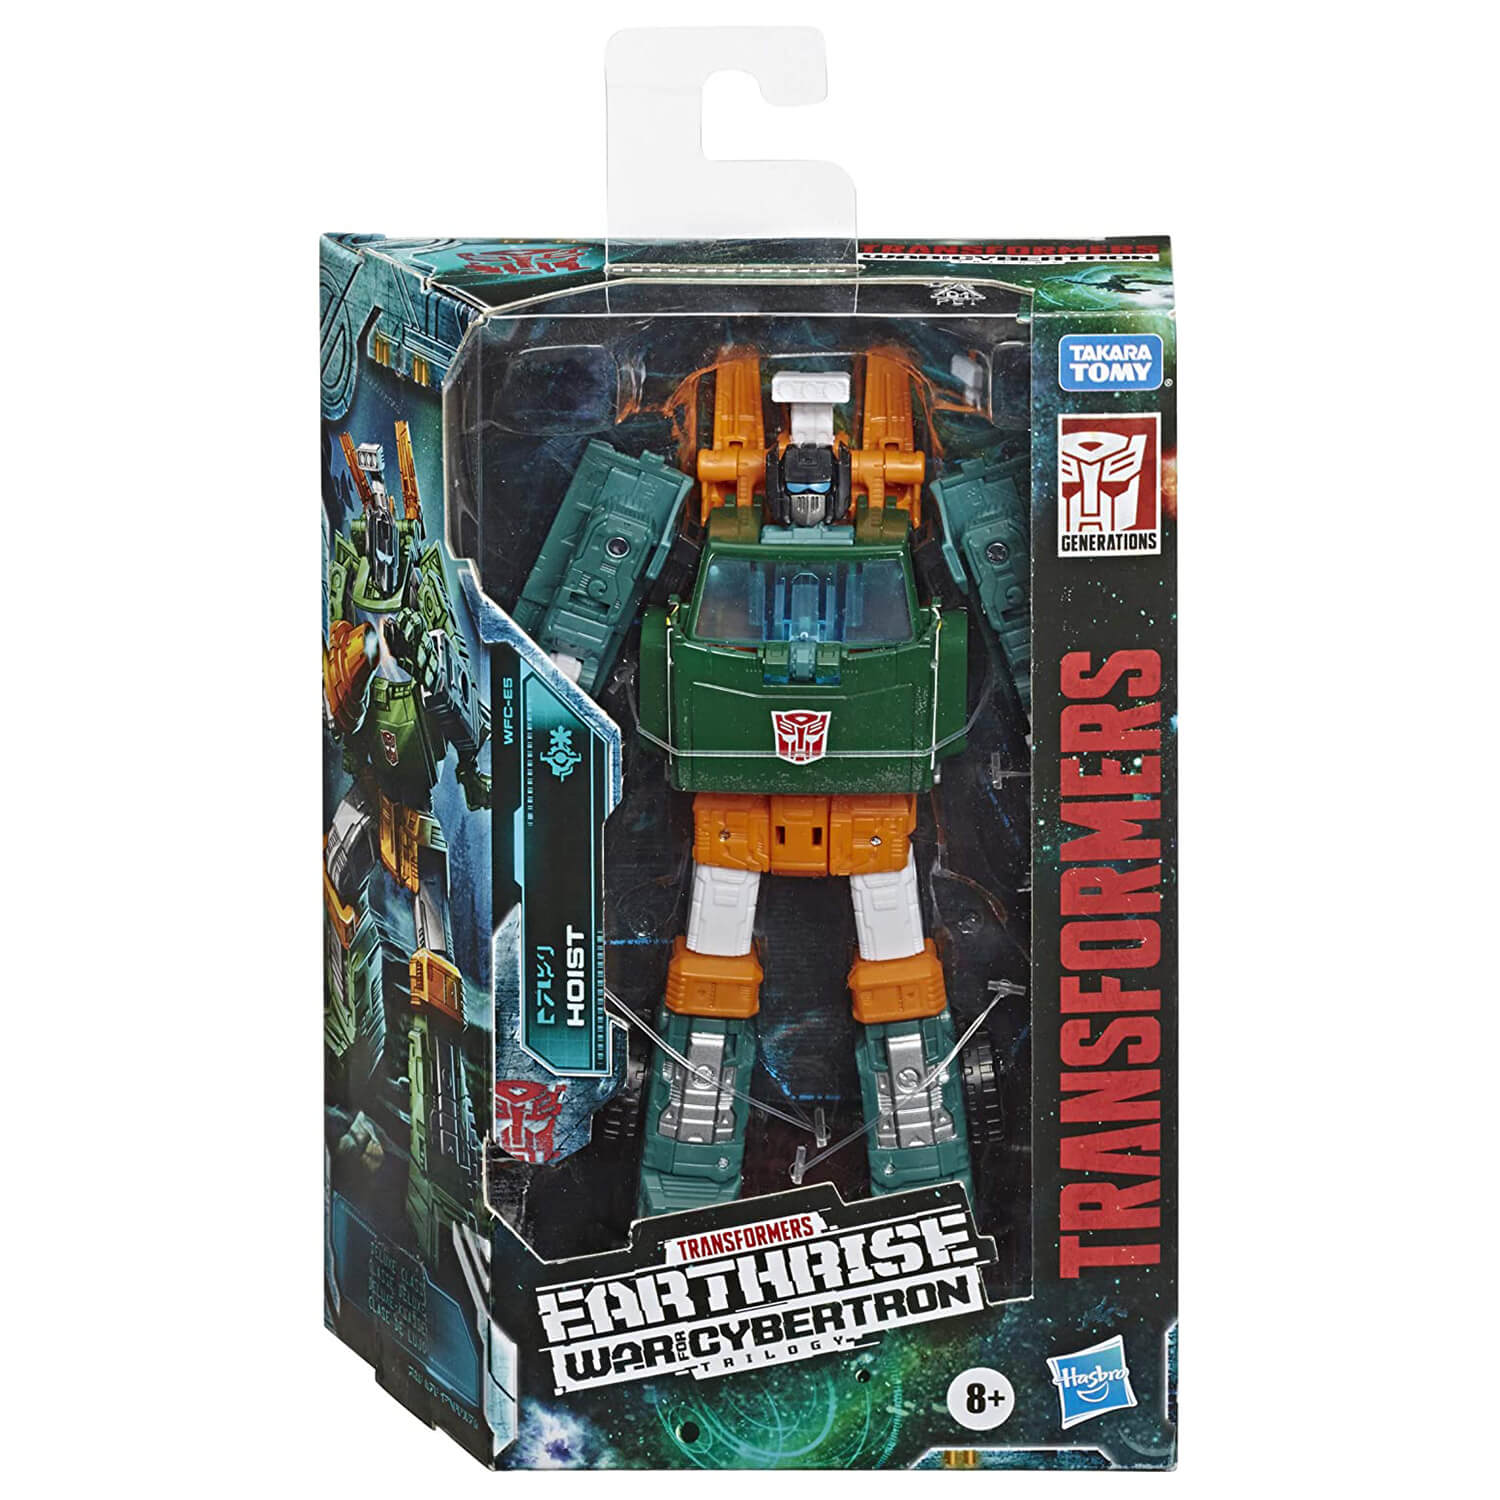 Front view of the Transformers Earthrise War for Cybertron Deluxe Hoist Figure package.